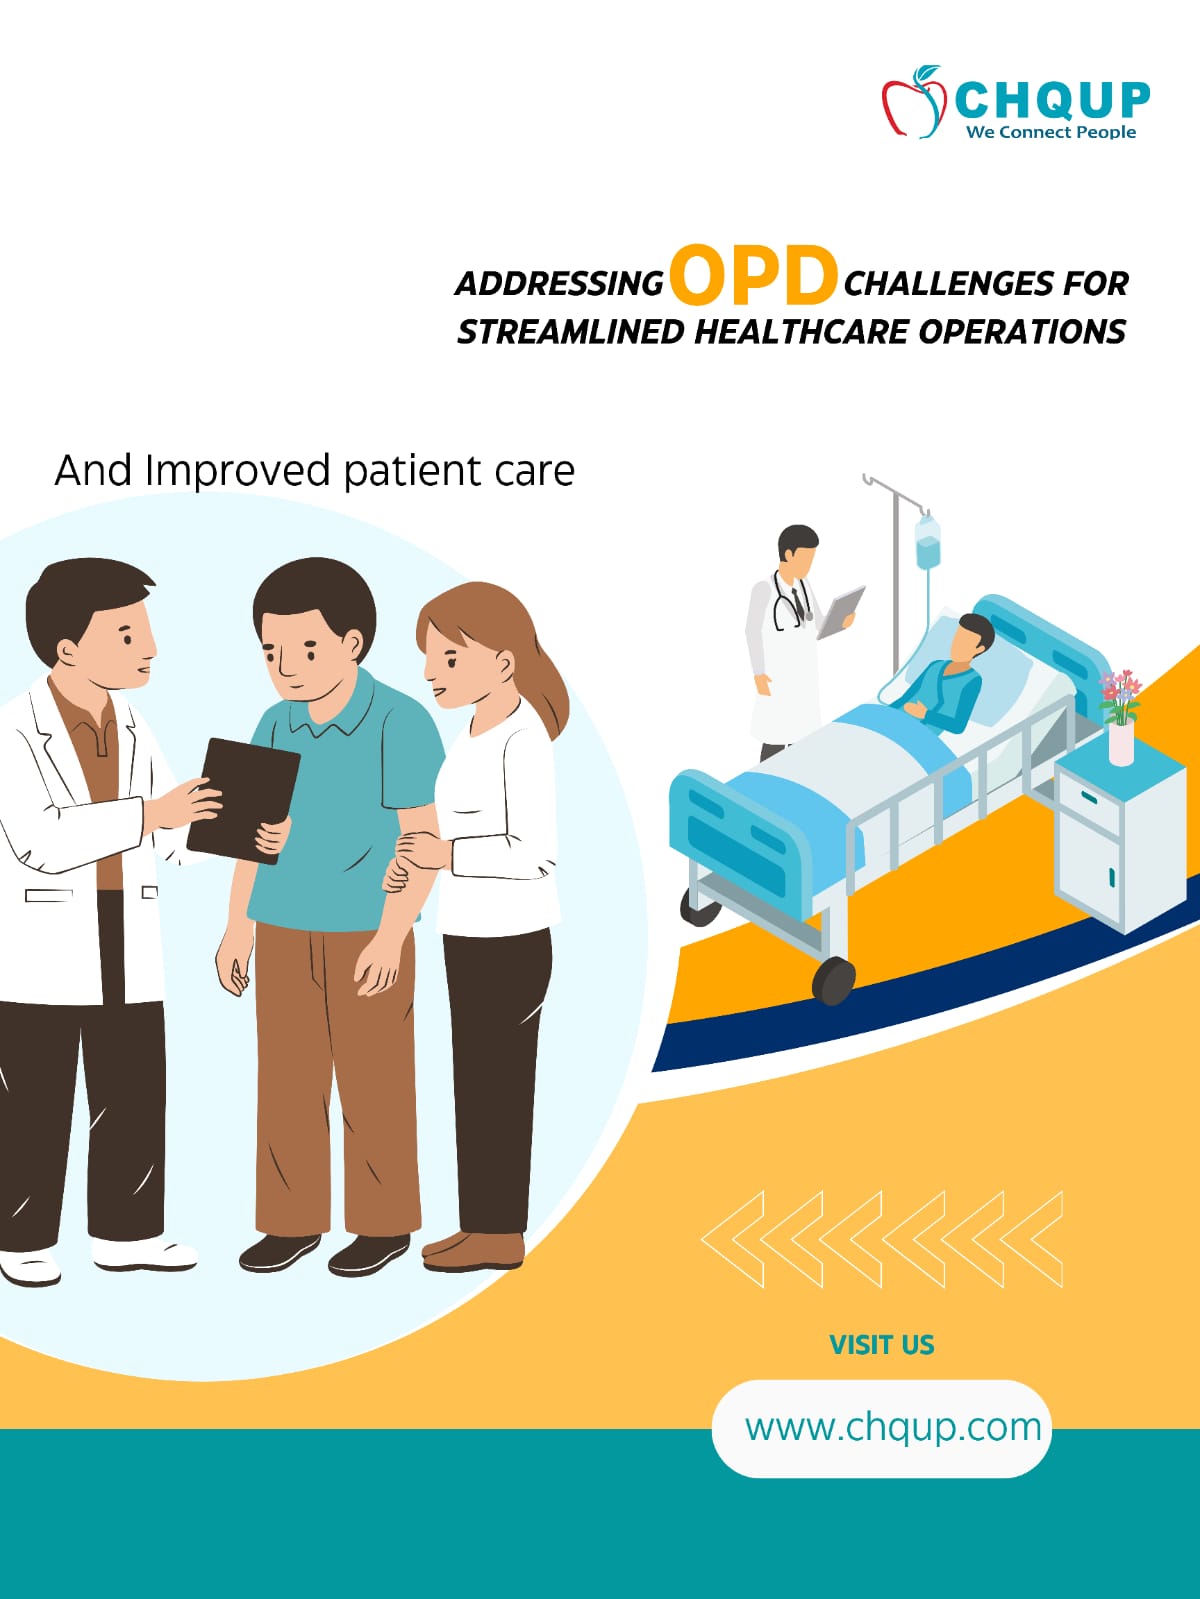 Simplifying Healthcare: CHQUP’s Solution to OPD Challenges